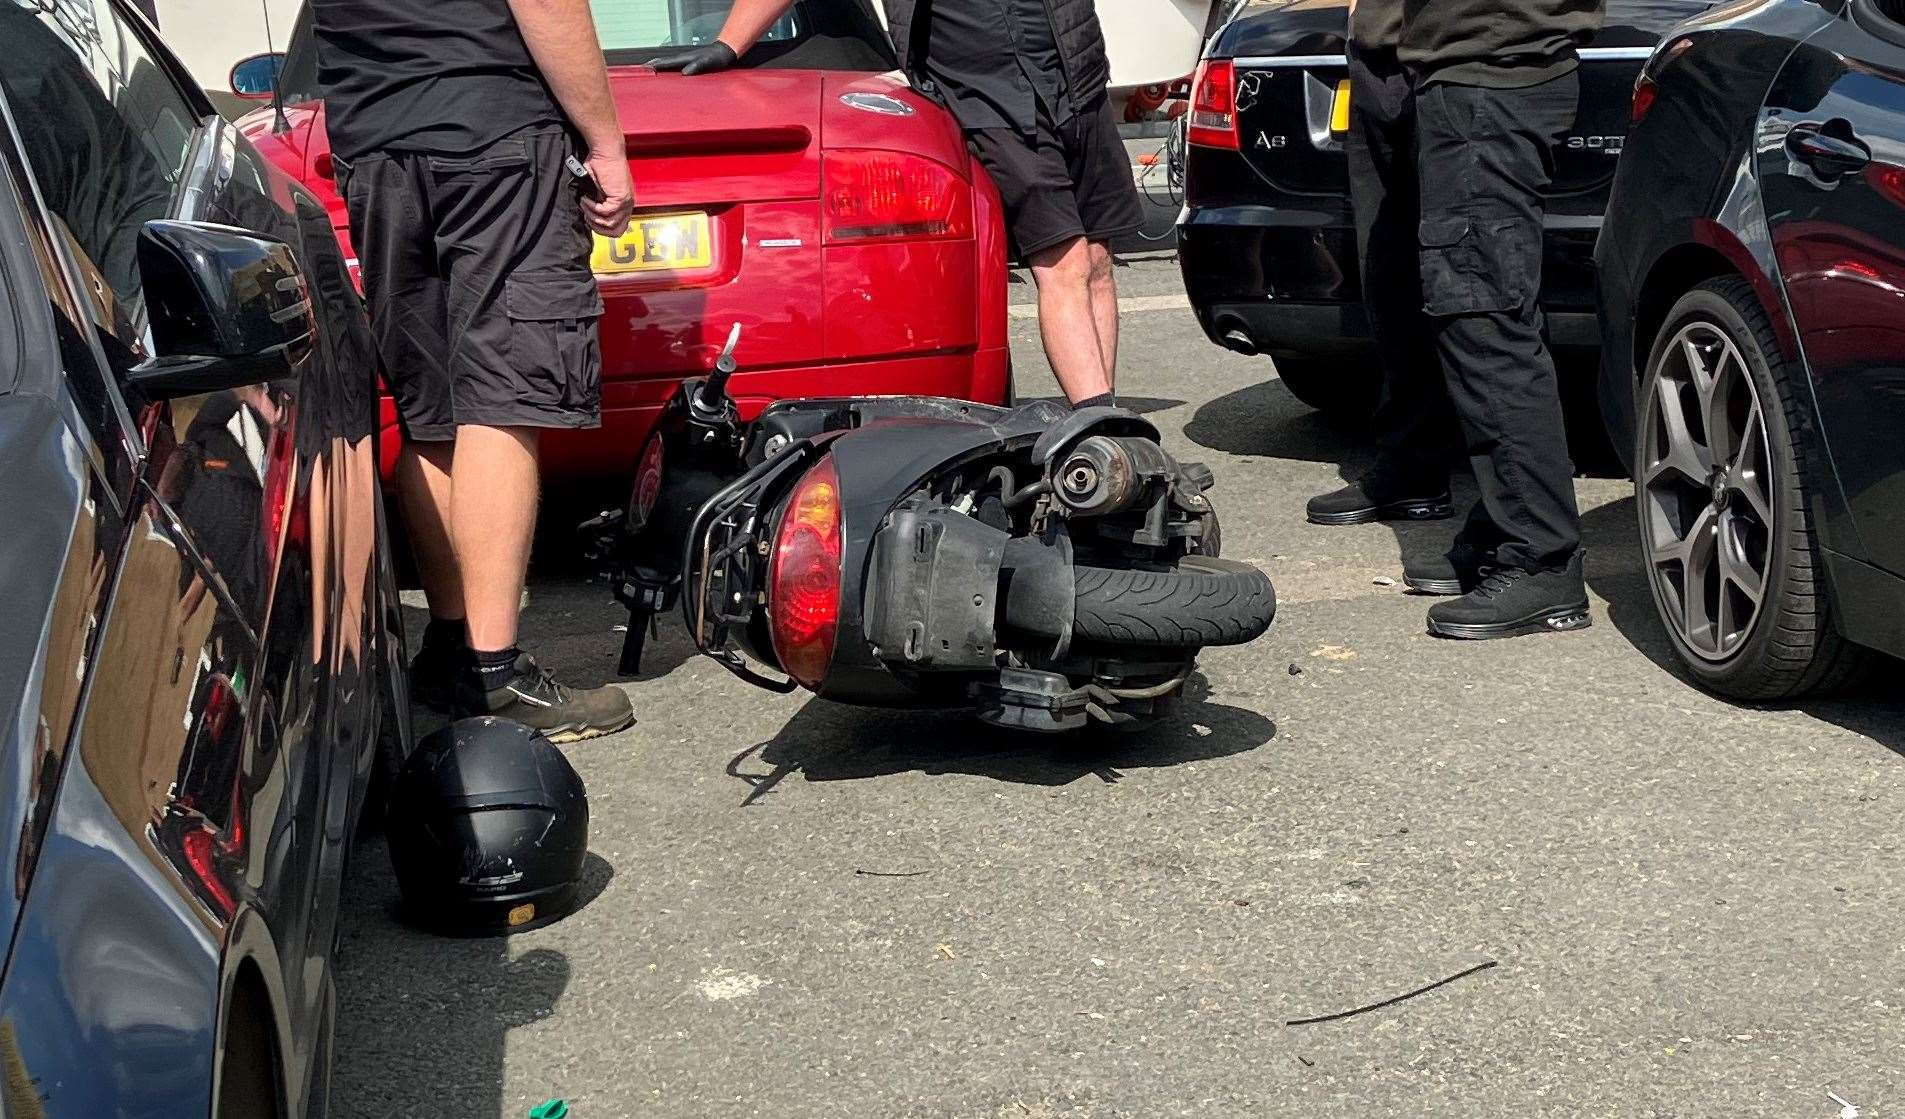 The moped after crashing in a car park off Sir Thomas Longley Road